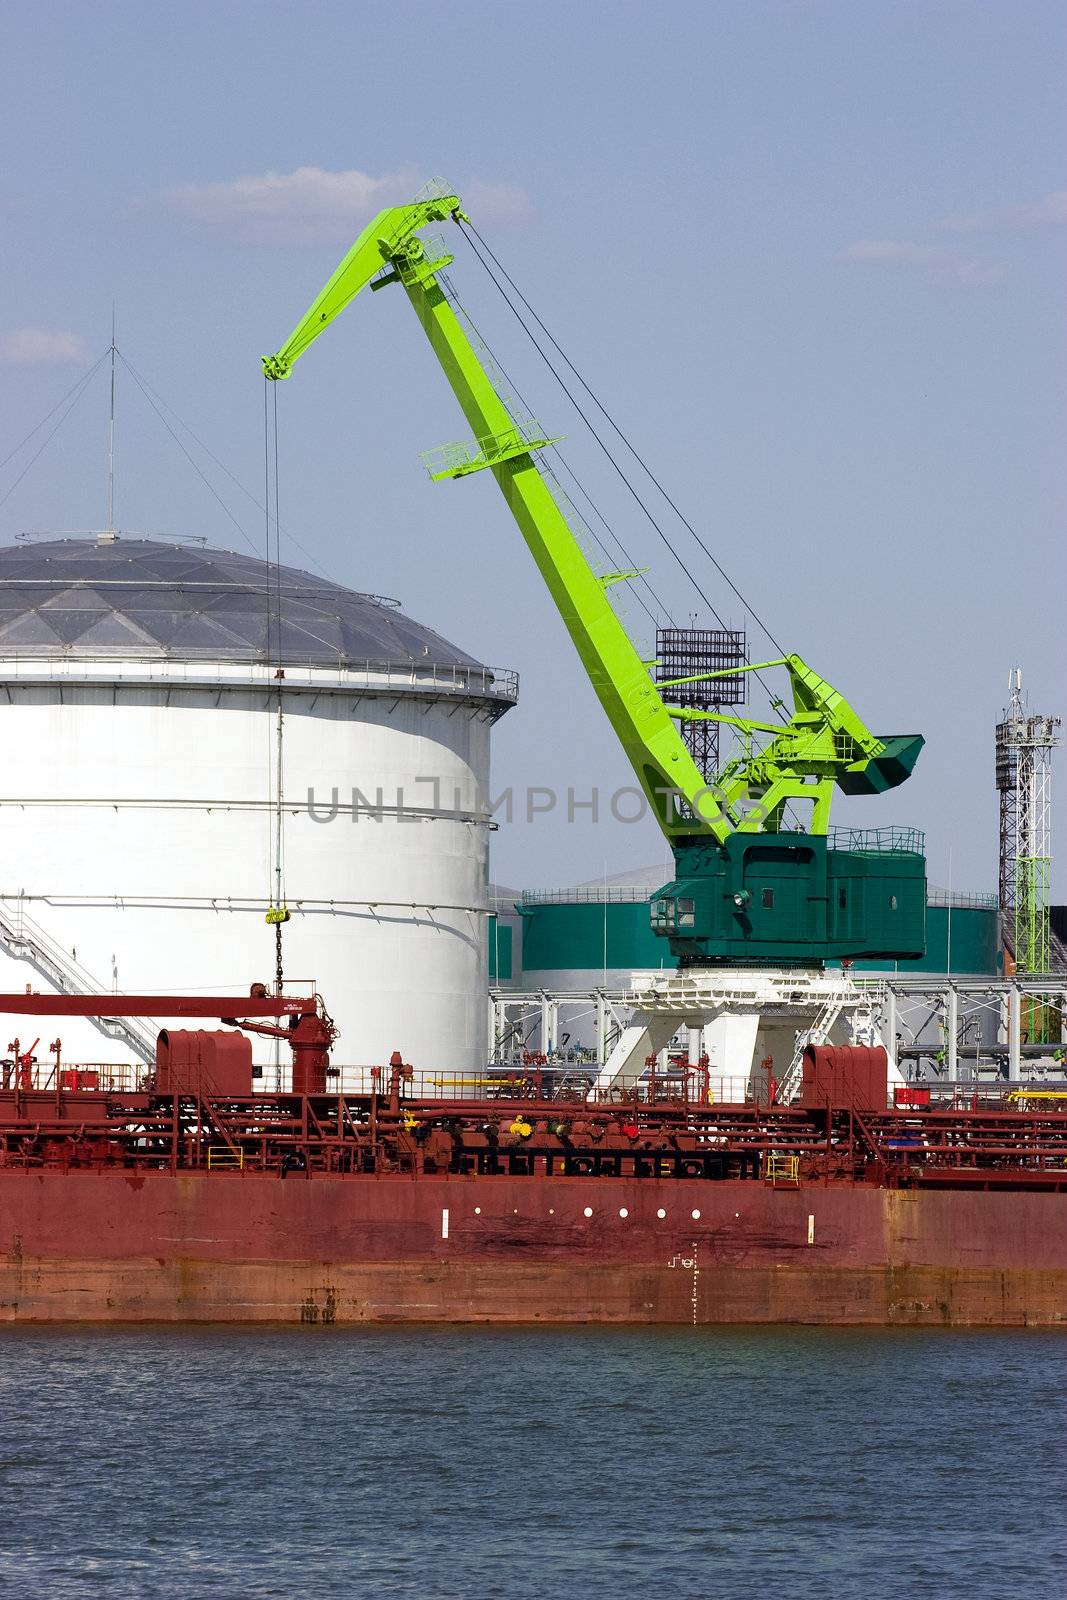 Green port crane working. White cylindrical tanks for industrial chemicals and petroleum products in background